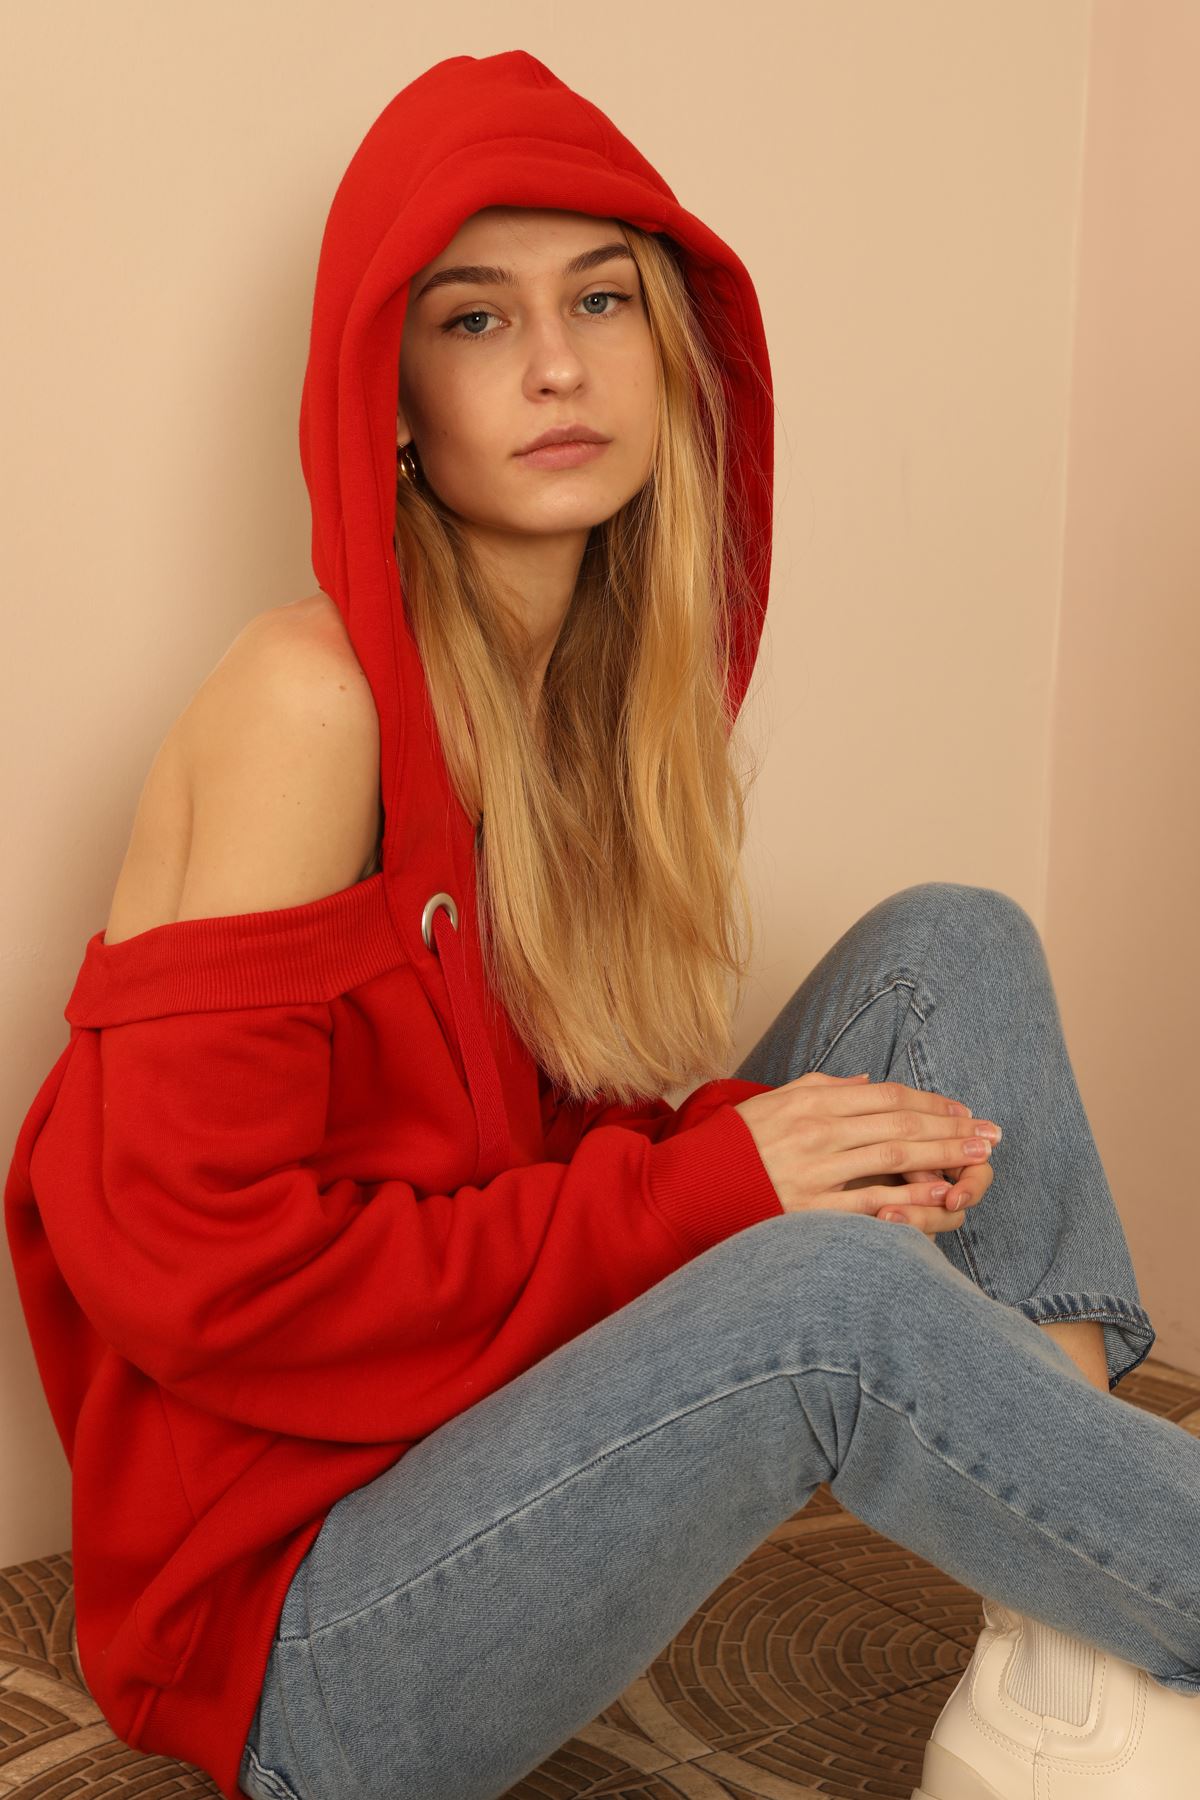 Third Knit With Wool İnside Fabric Hooded Hip Height Shoulder Detailed Women Sweatshirt - Red